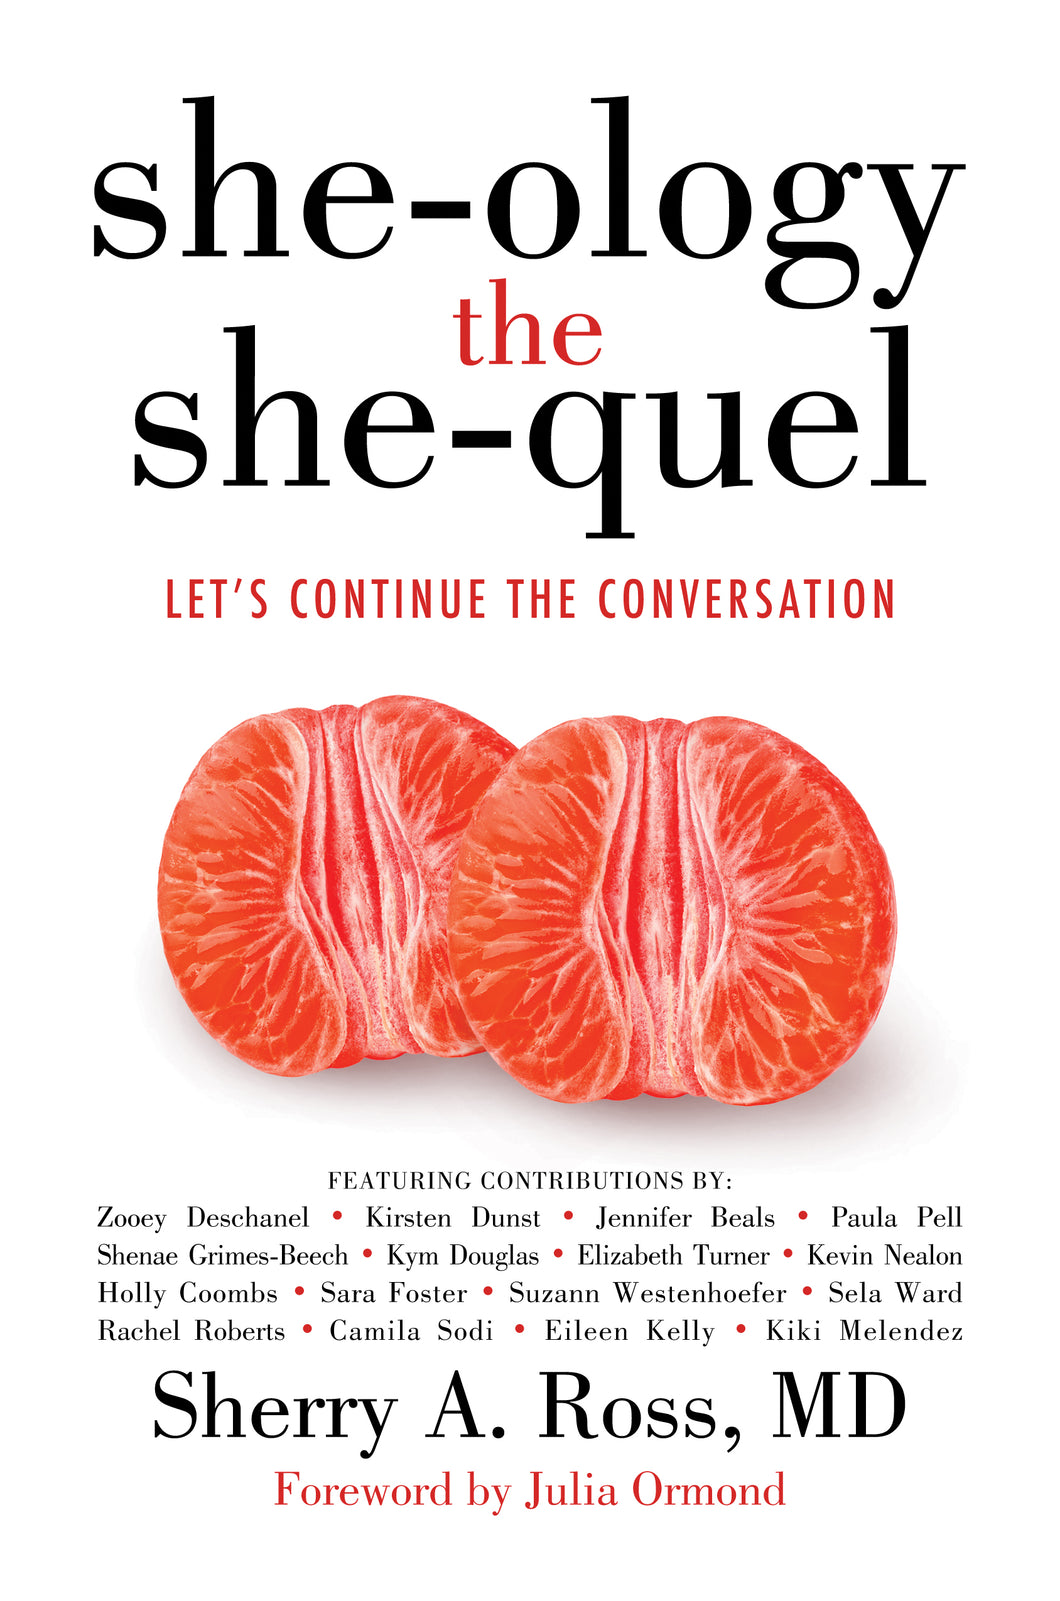 she-ology the she-quel - Let's continue the conversation